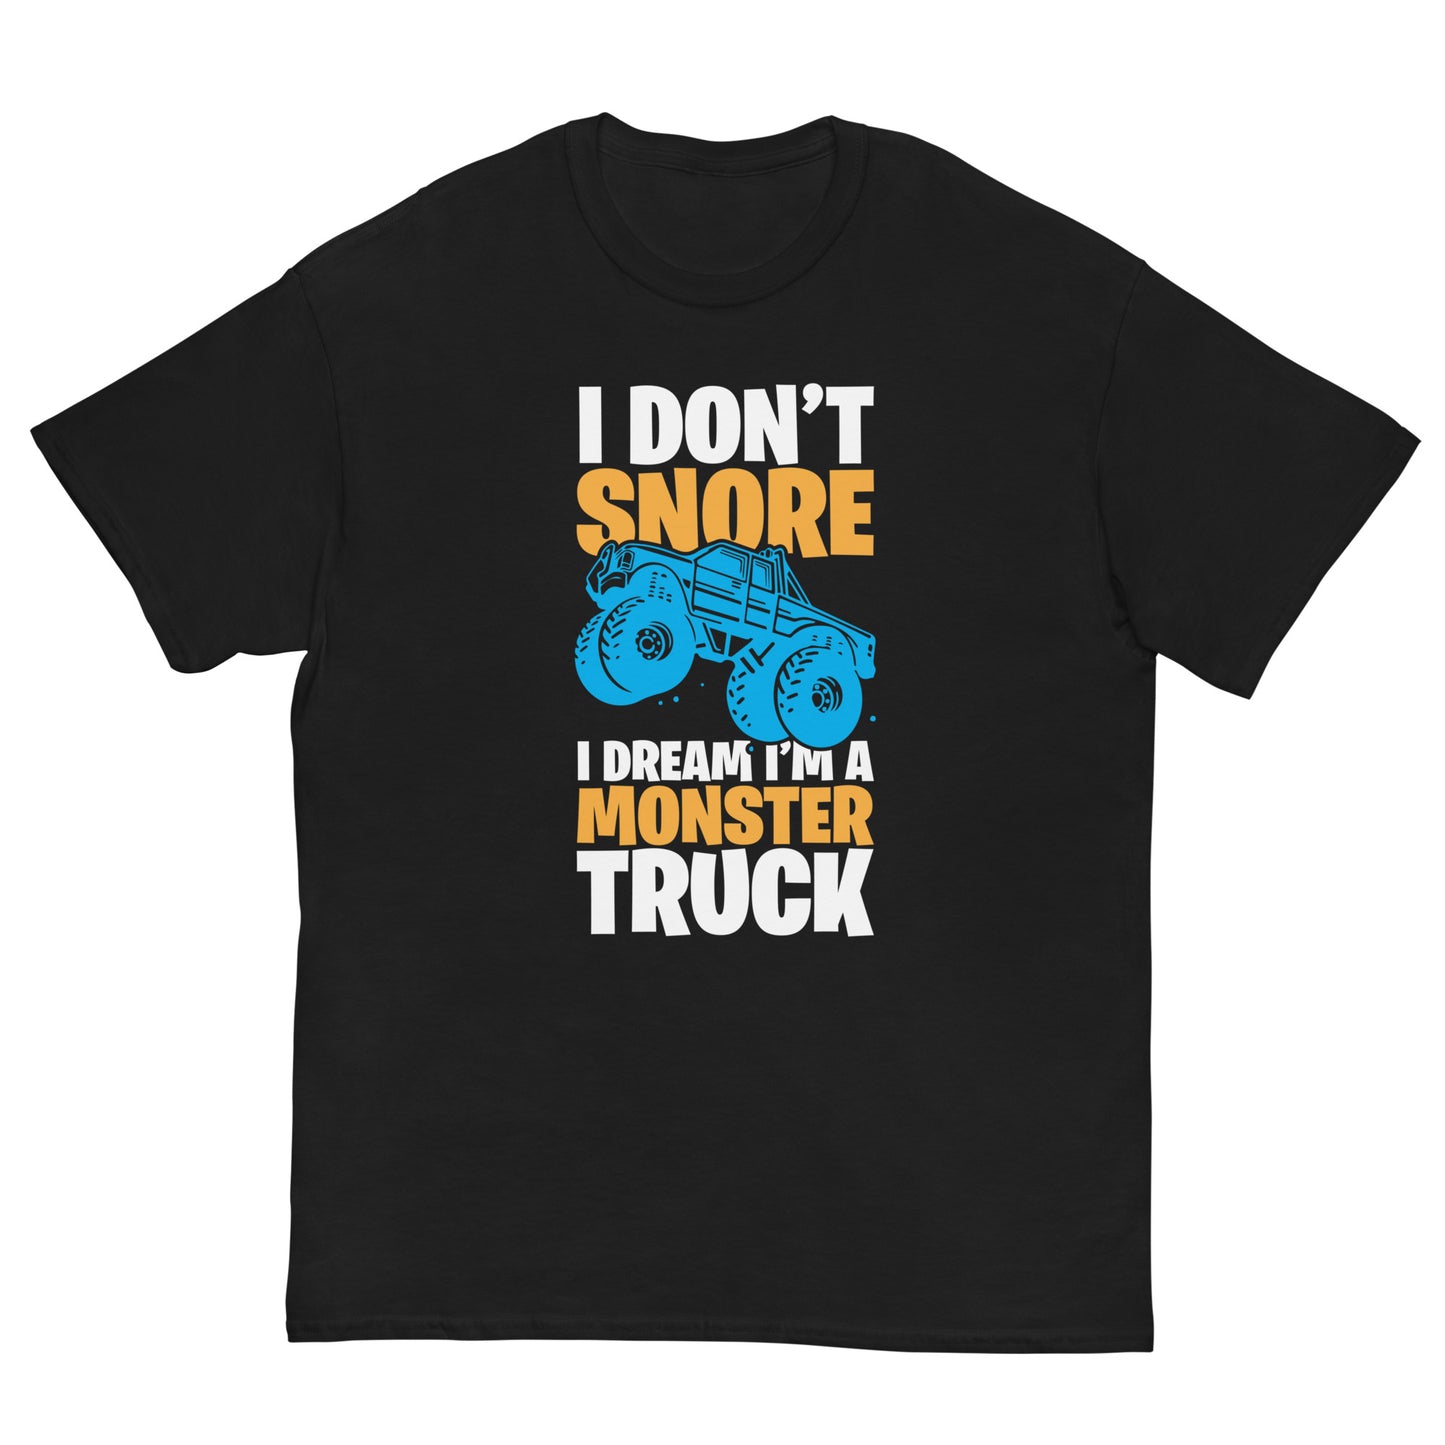 Men's classic tee " I Don't Snore"